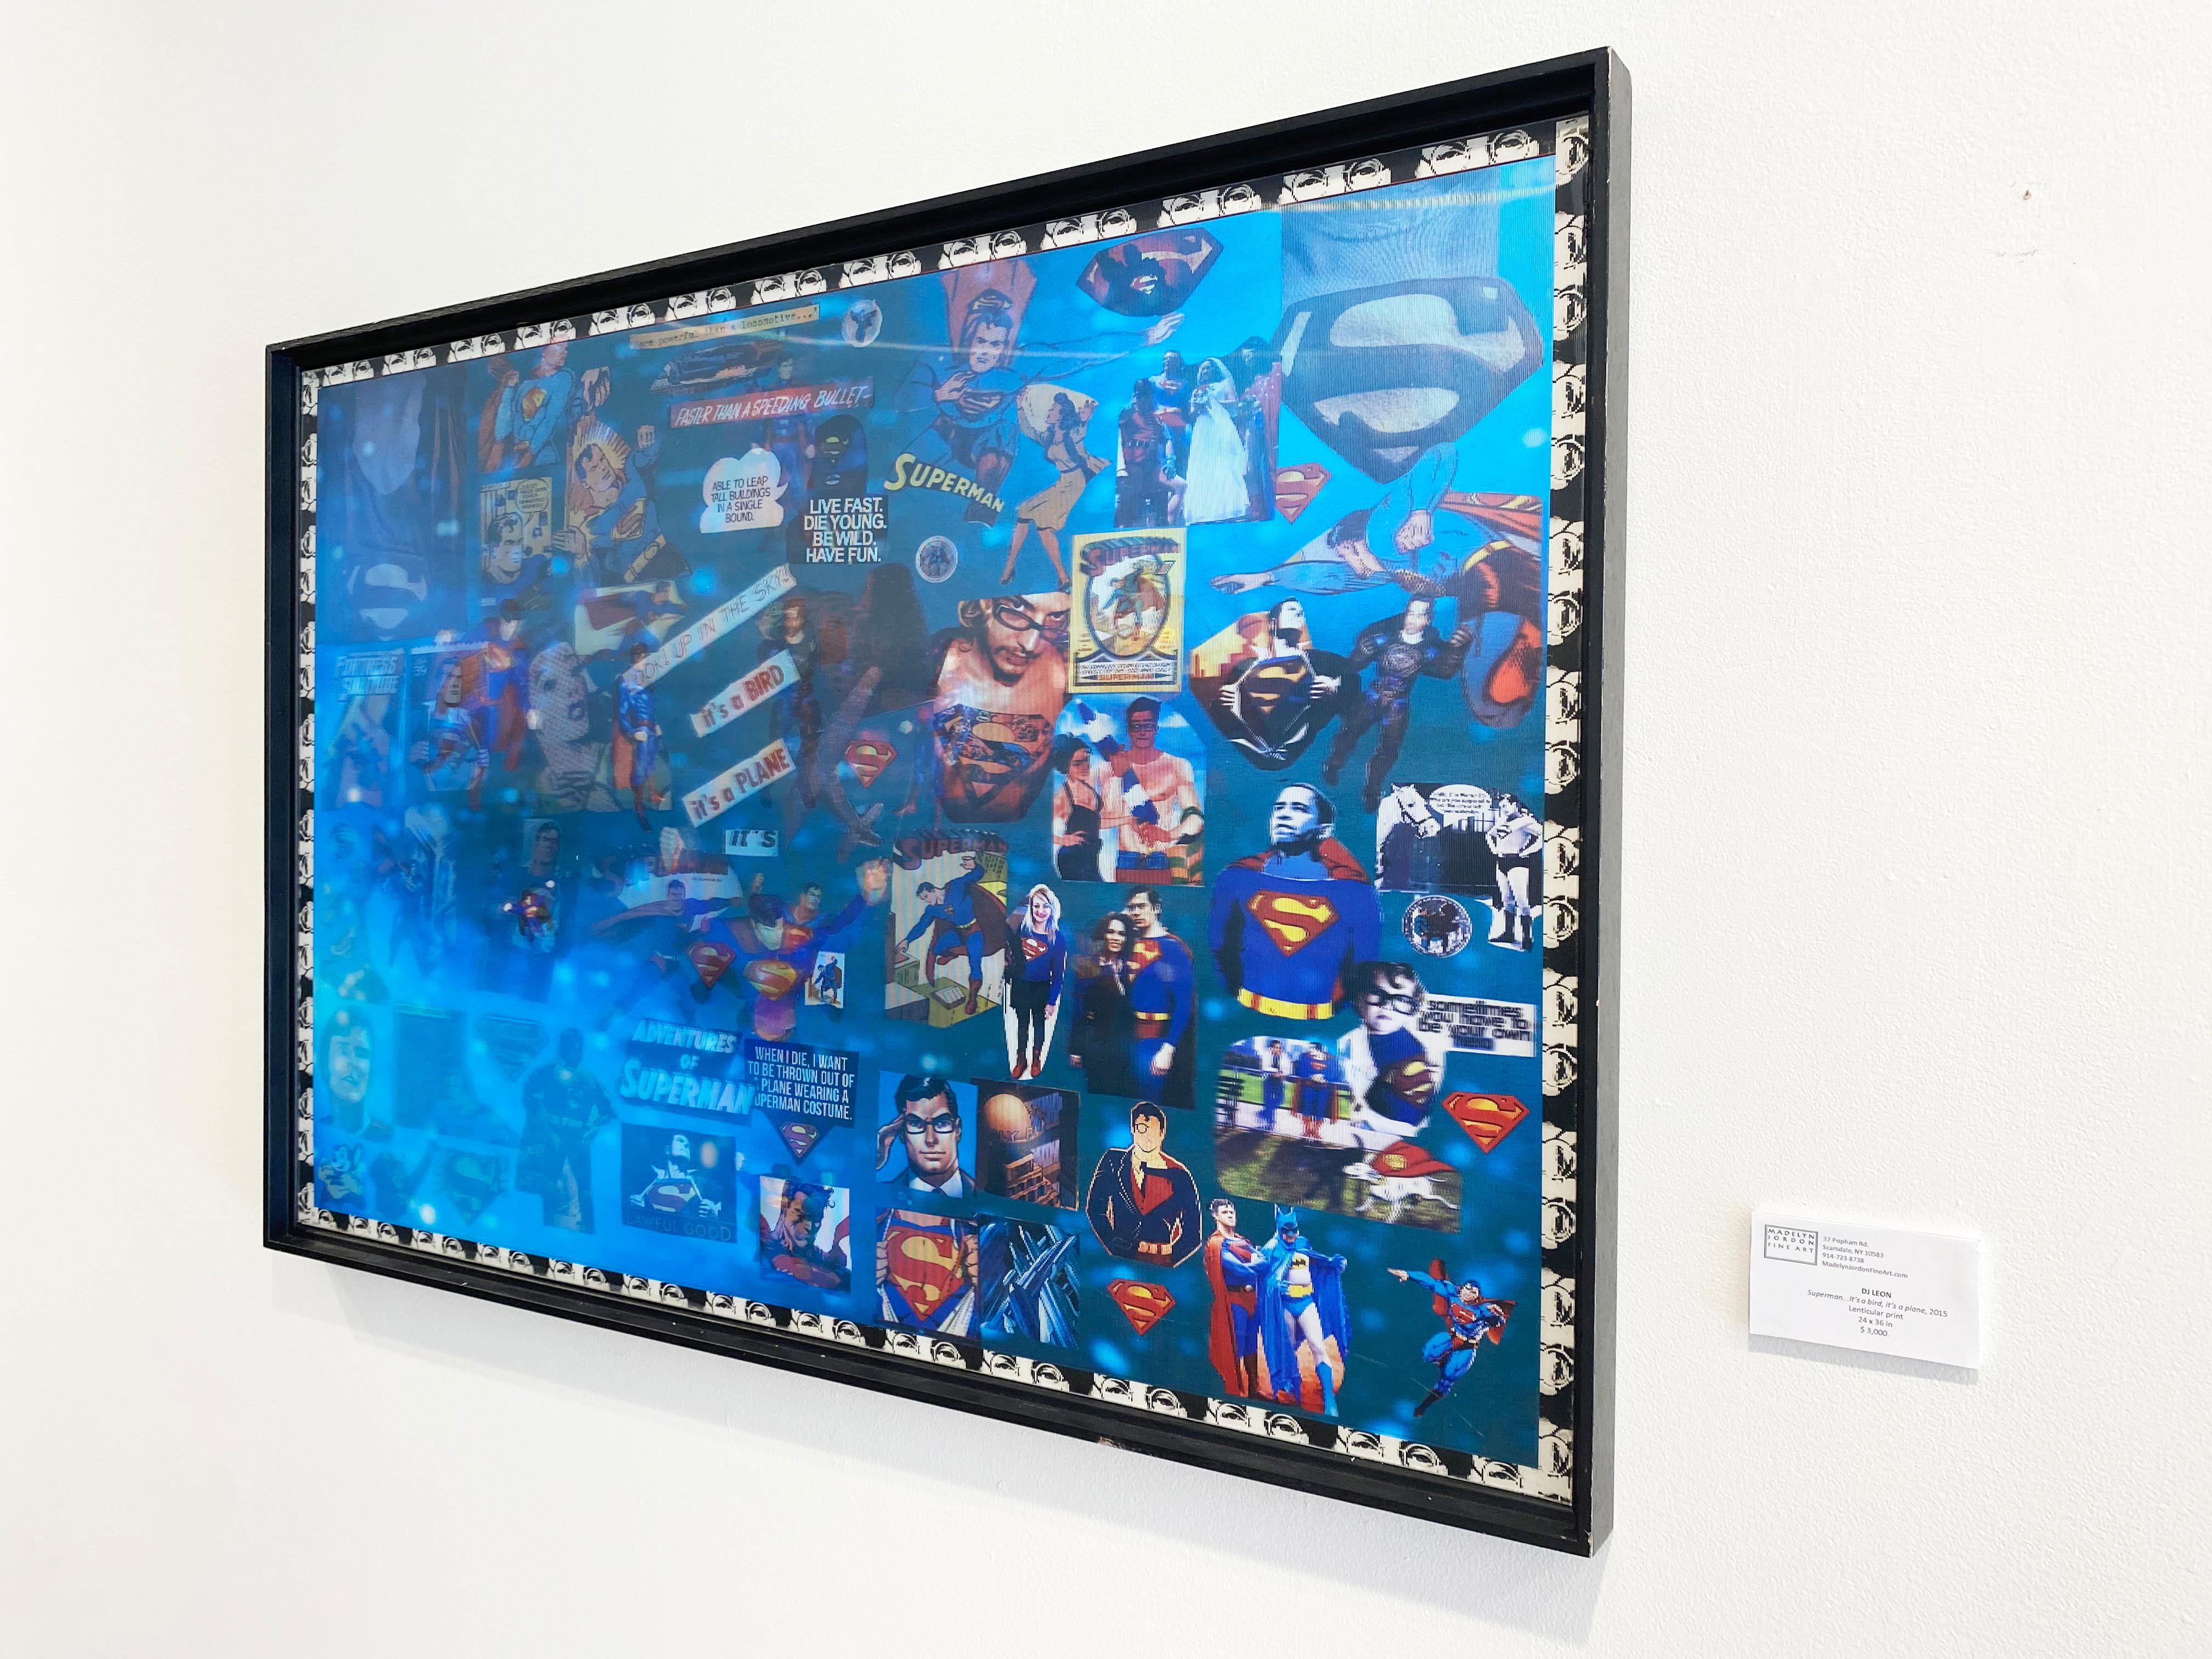 'Superman: It's a Bird, It's a Plane' by DJ Leon, 2014. Lenticular print, 24 x 36 inches. Ed. of 5.  This work incorporates, appropriates, and combines images and text found in the Superman comics. The work moves and shifts as the viewer changes